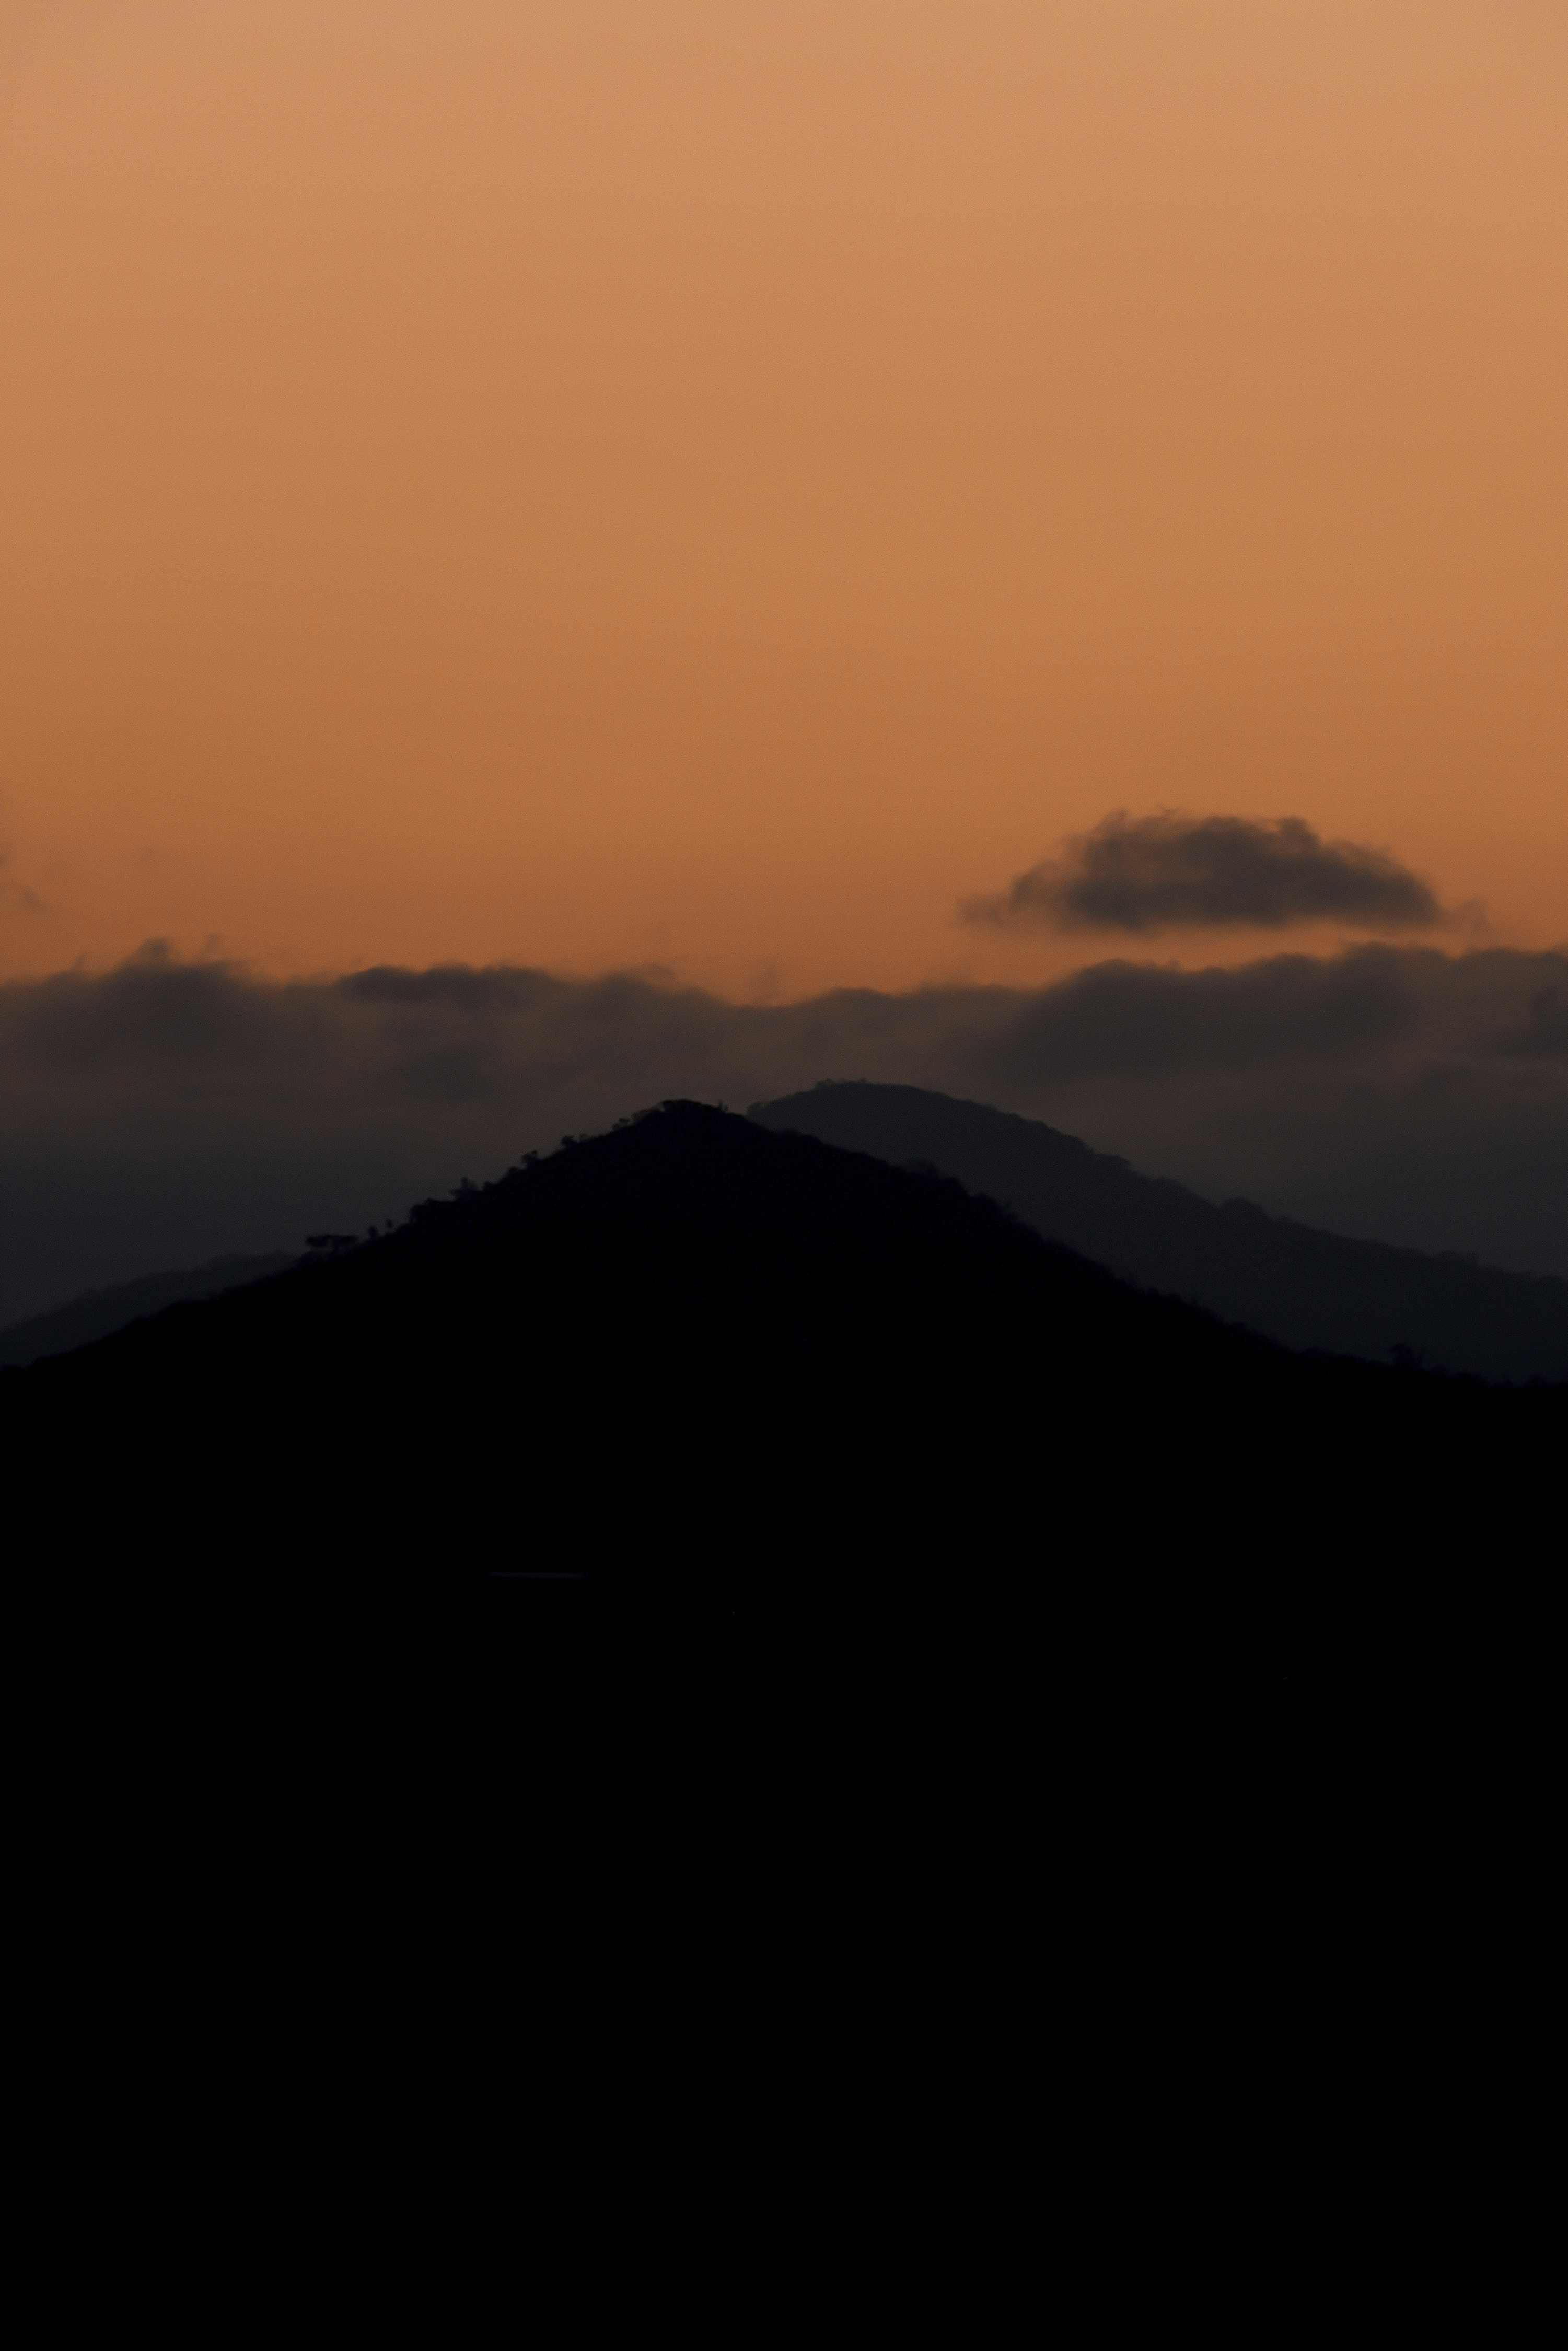 Mountains Silhouette During Sunset Wallpapers